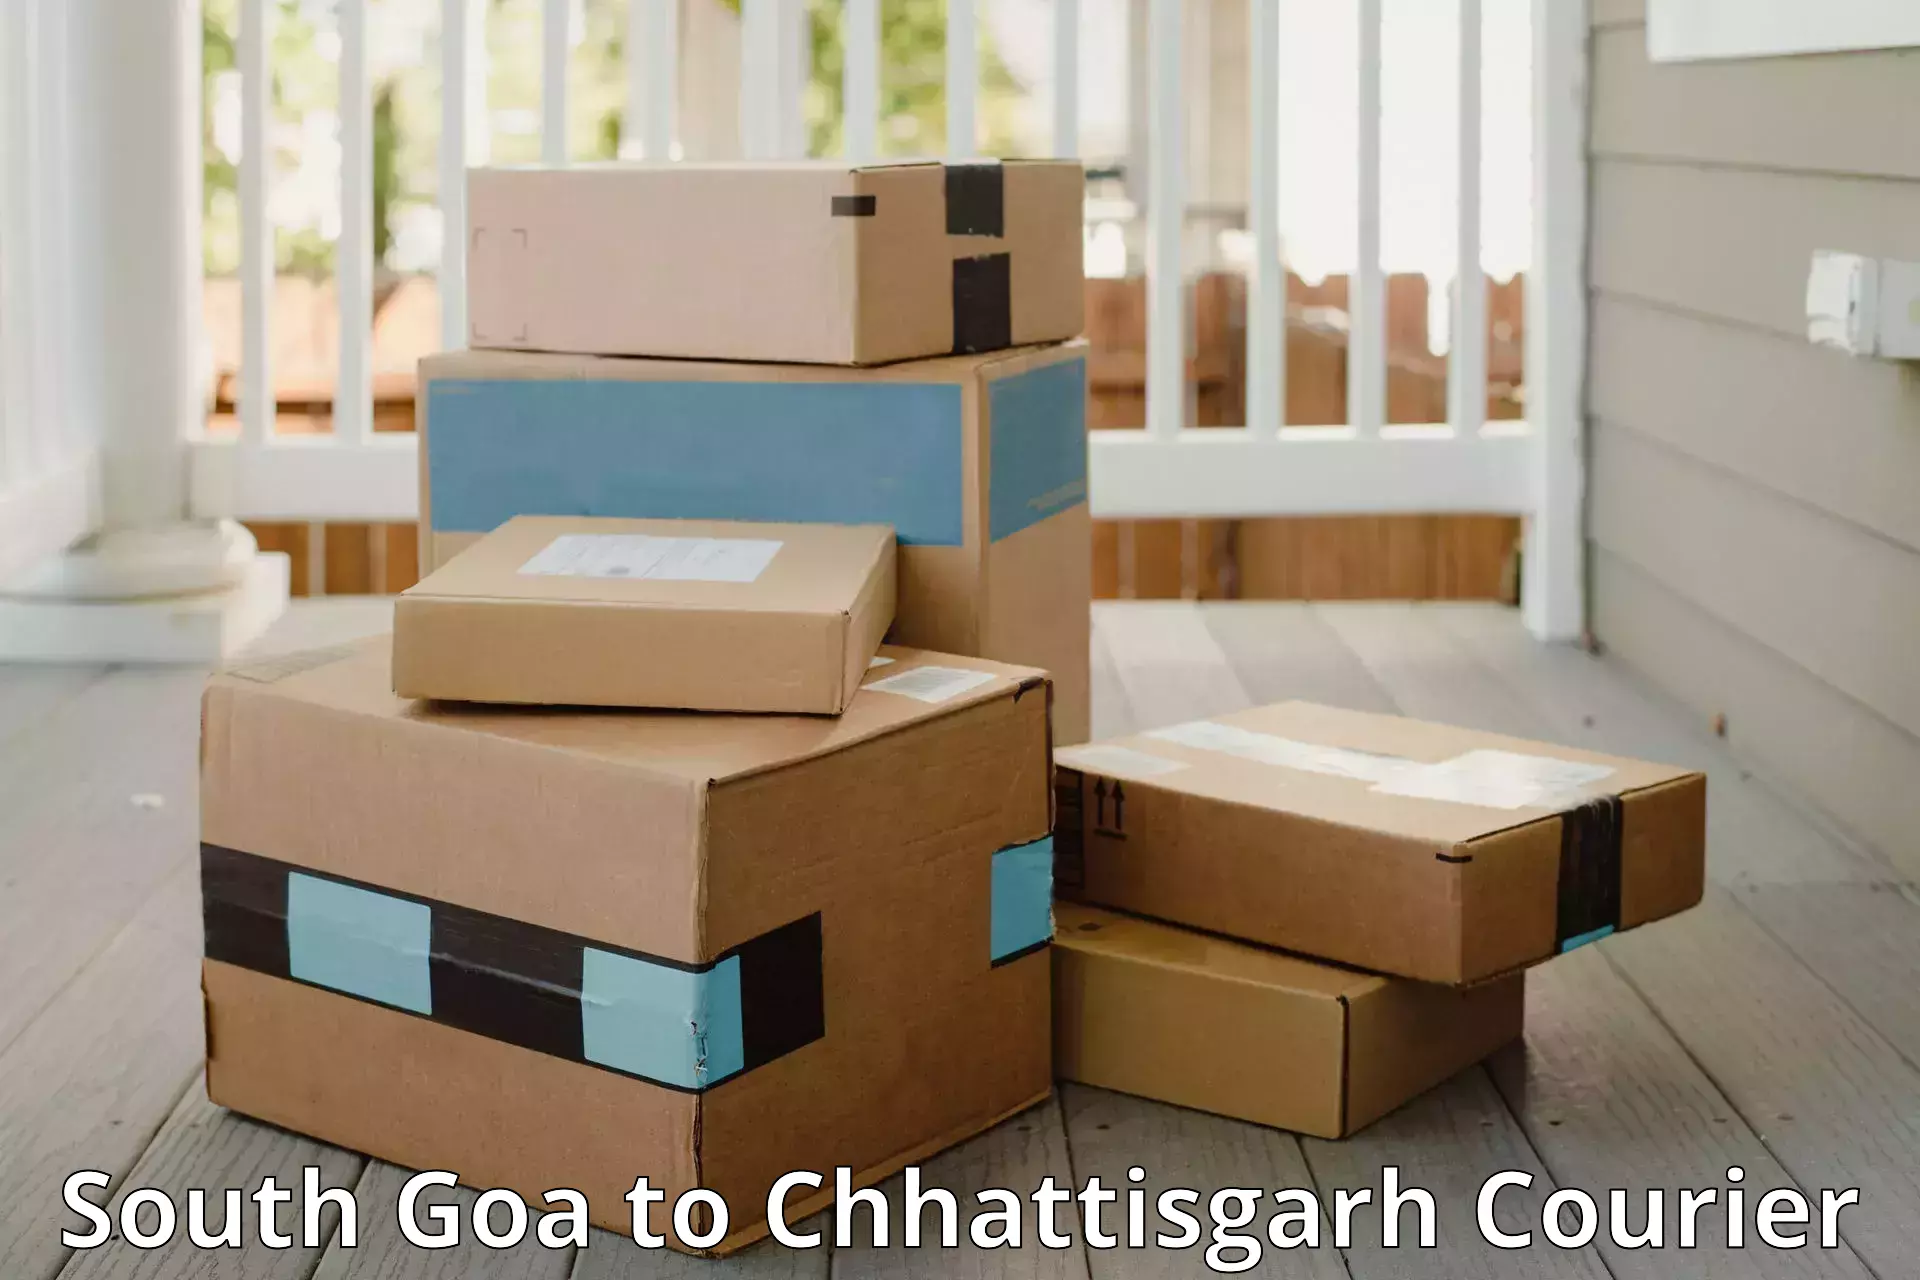 Door to door luggage delivery in South Goa to Pendra